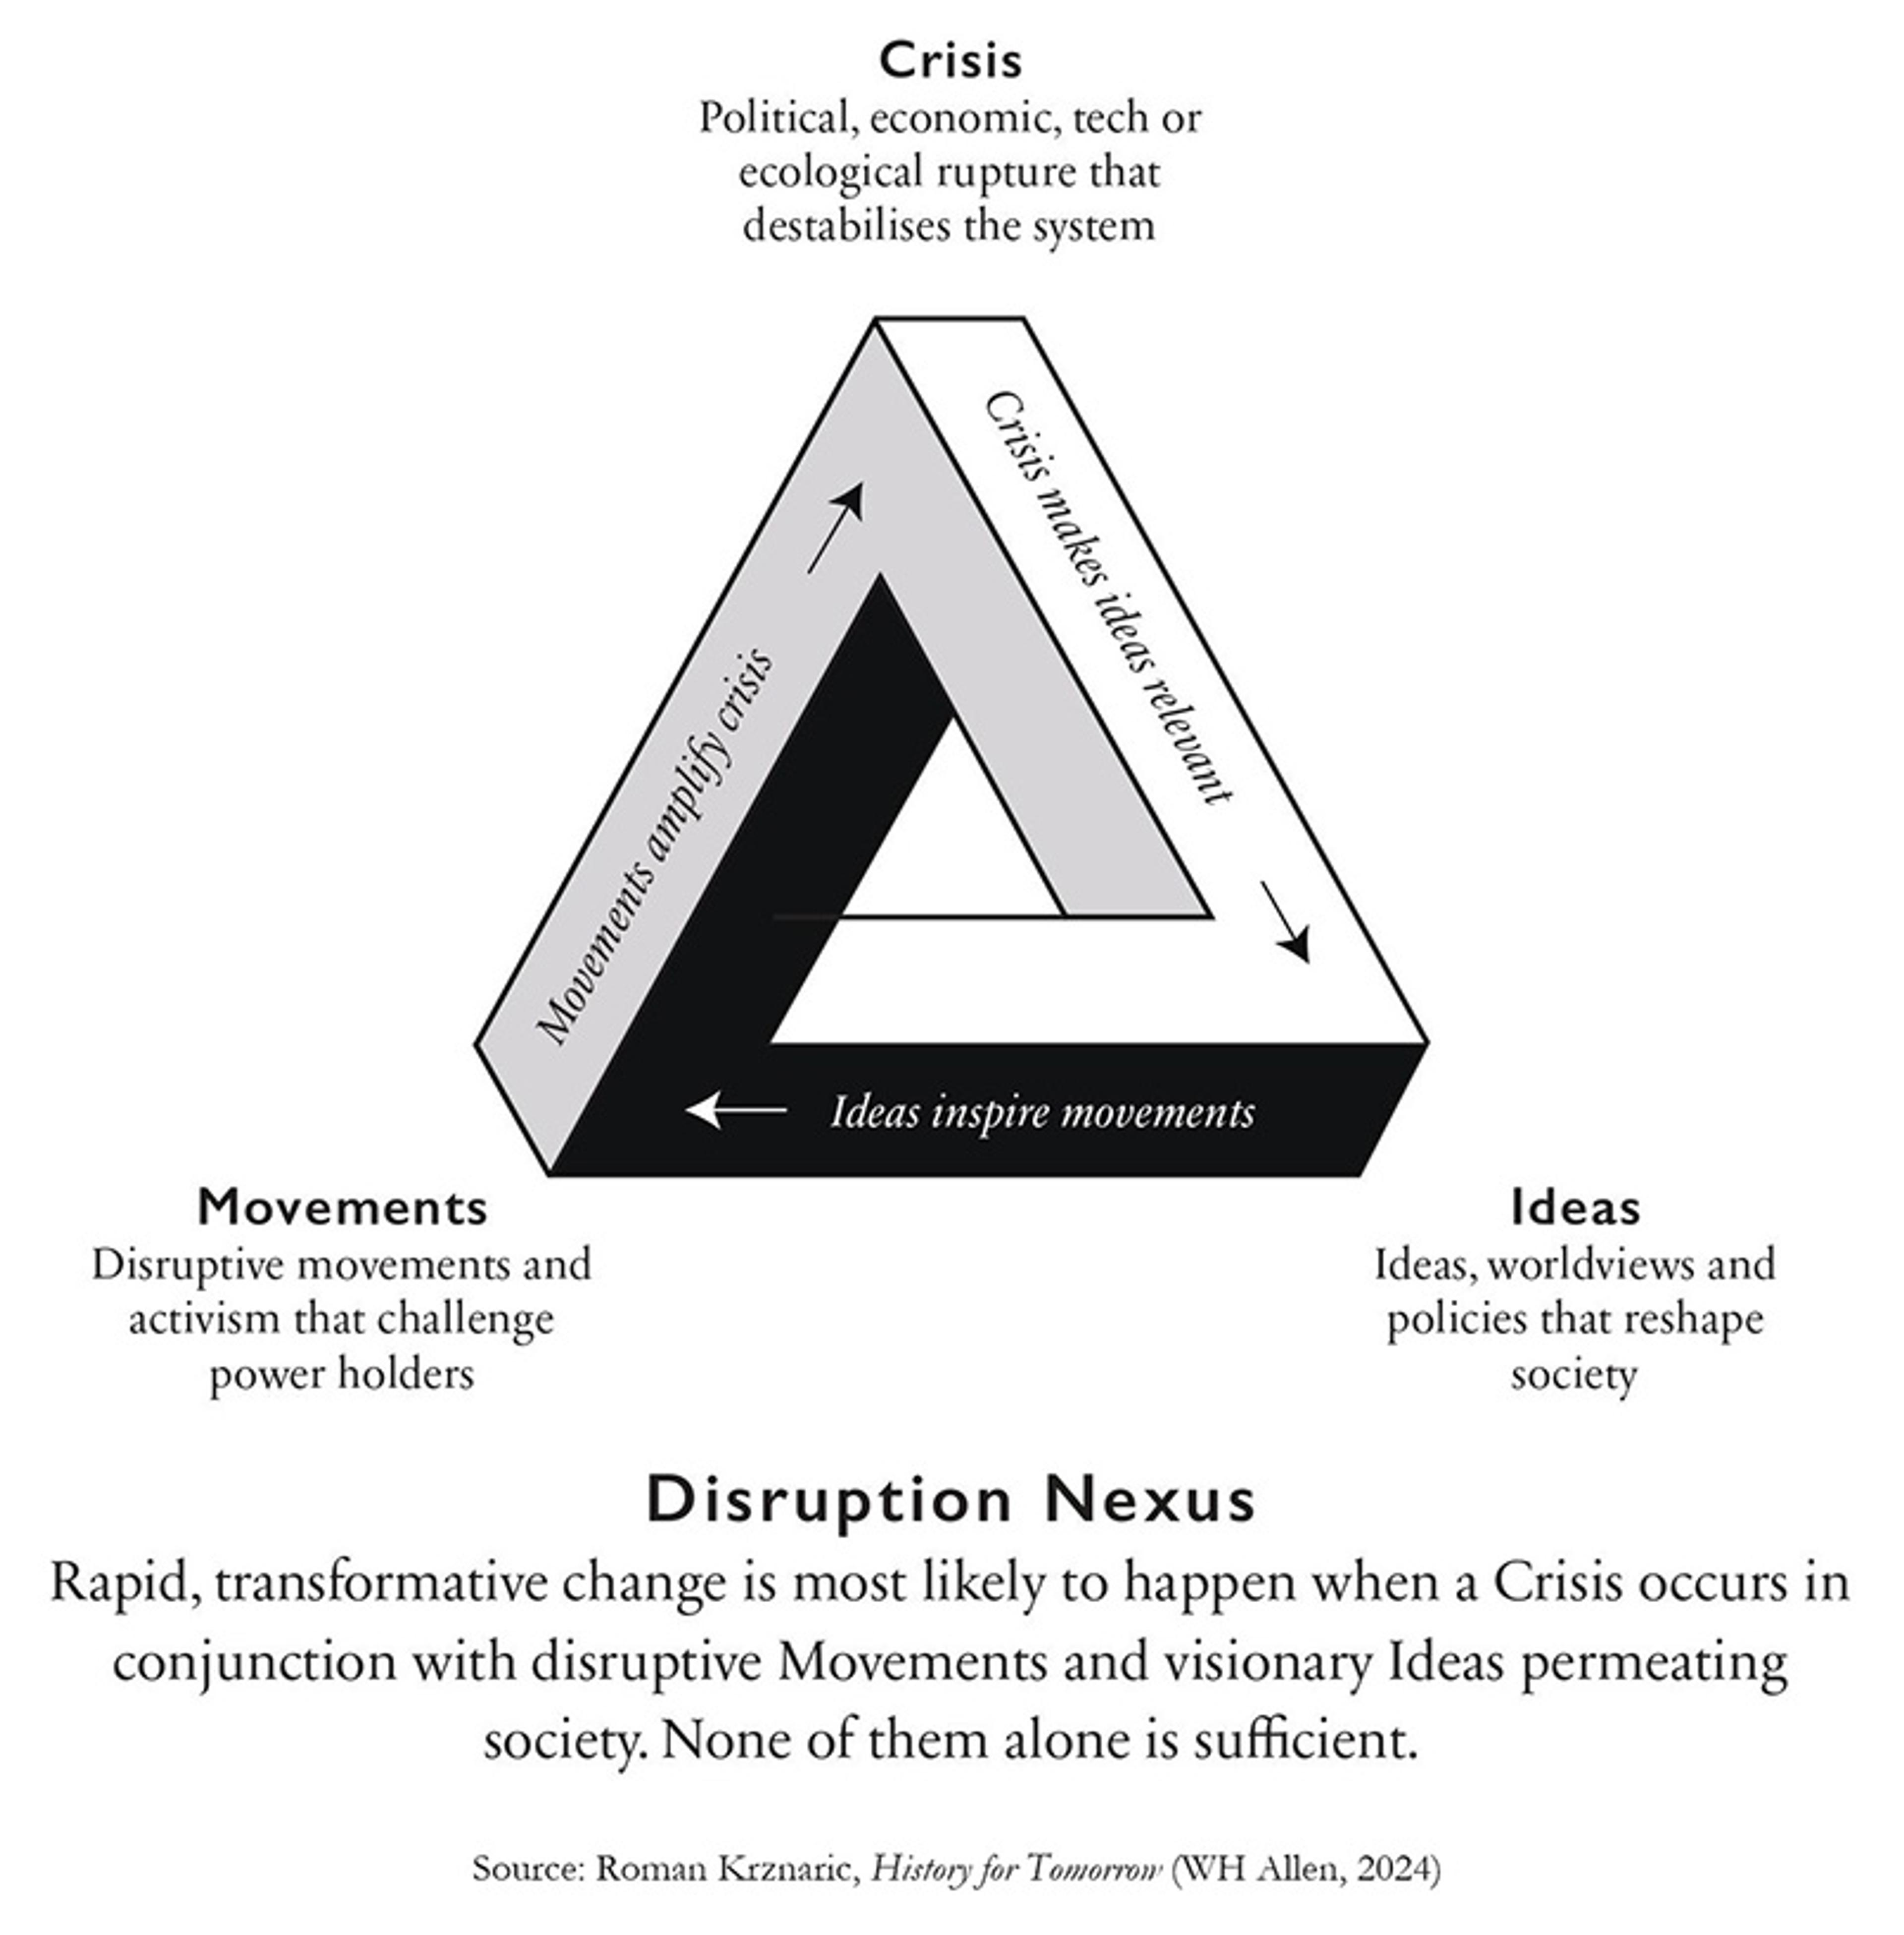 Diagram illustrating the Disruption Nexus by Roman Krznaric. Shows a Penrose triangle with angles labelled ‘Crisis,’ ‘Ideas,’ and ‘Movements,’ each enhancing the other. Text explains rapid, transformative change arises from crisis, disruptive movements, and visionary ideas together. Source: Roman Krznaric, History for Tomorrow (WH Allen, 2024).